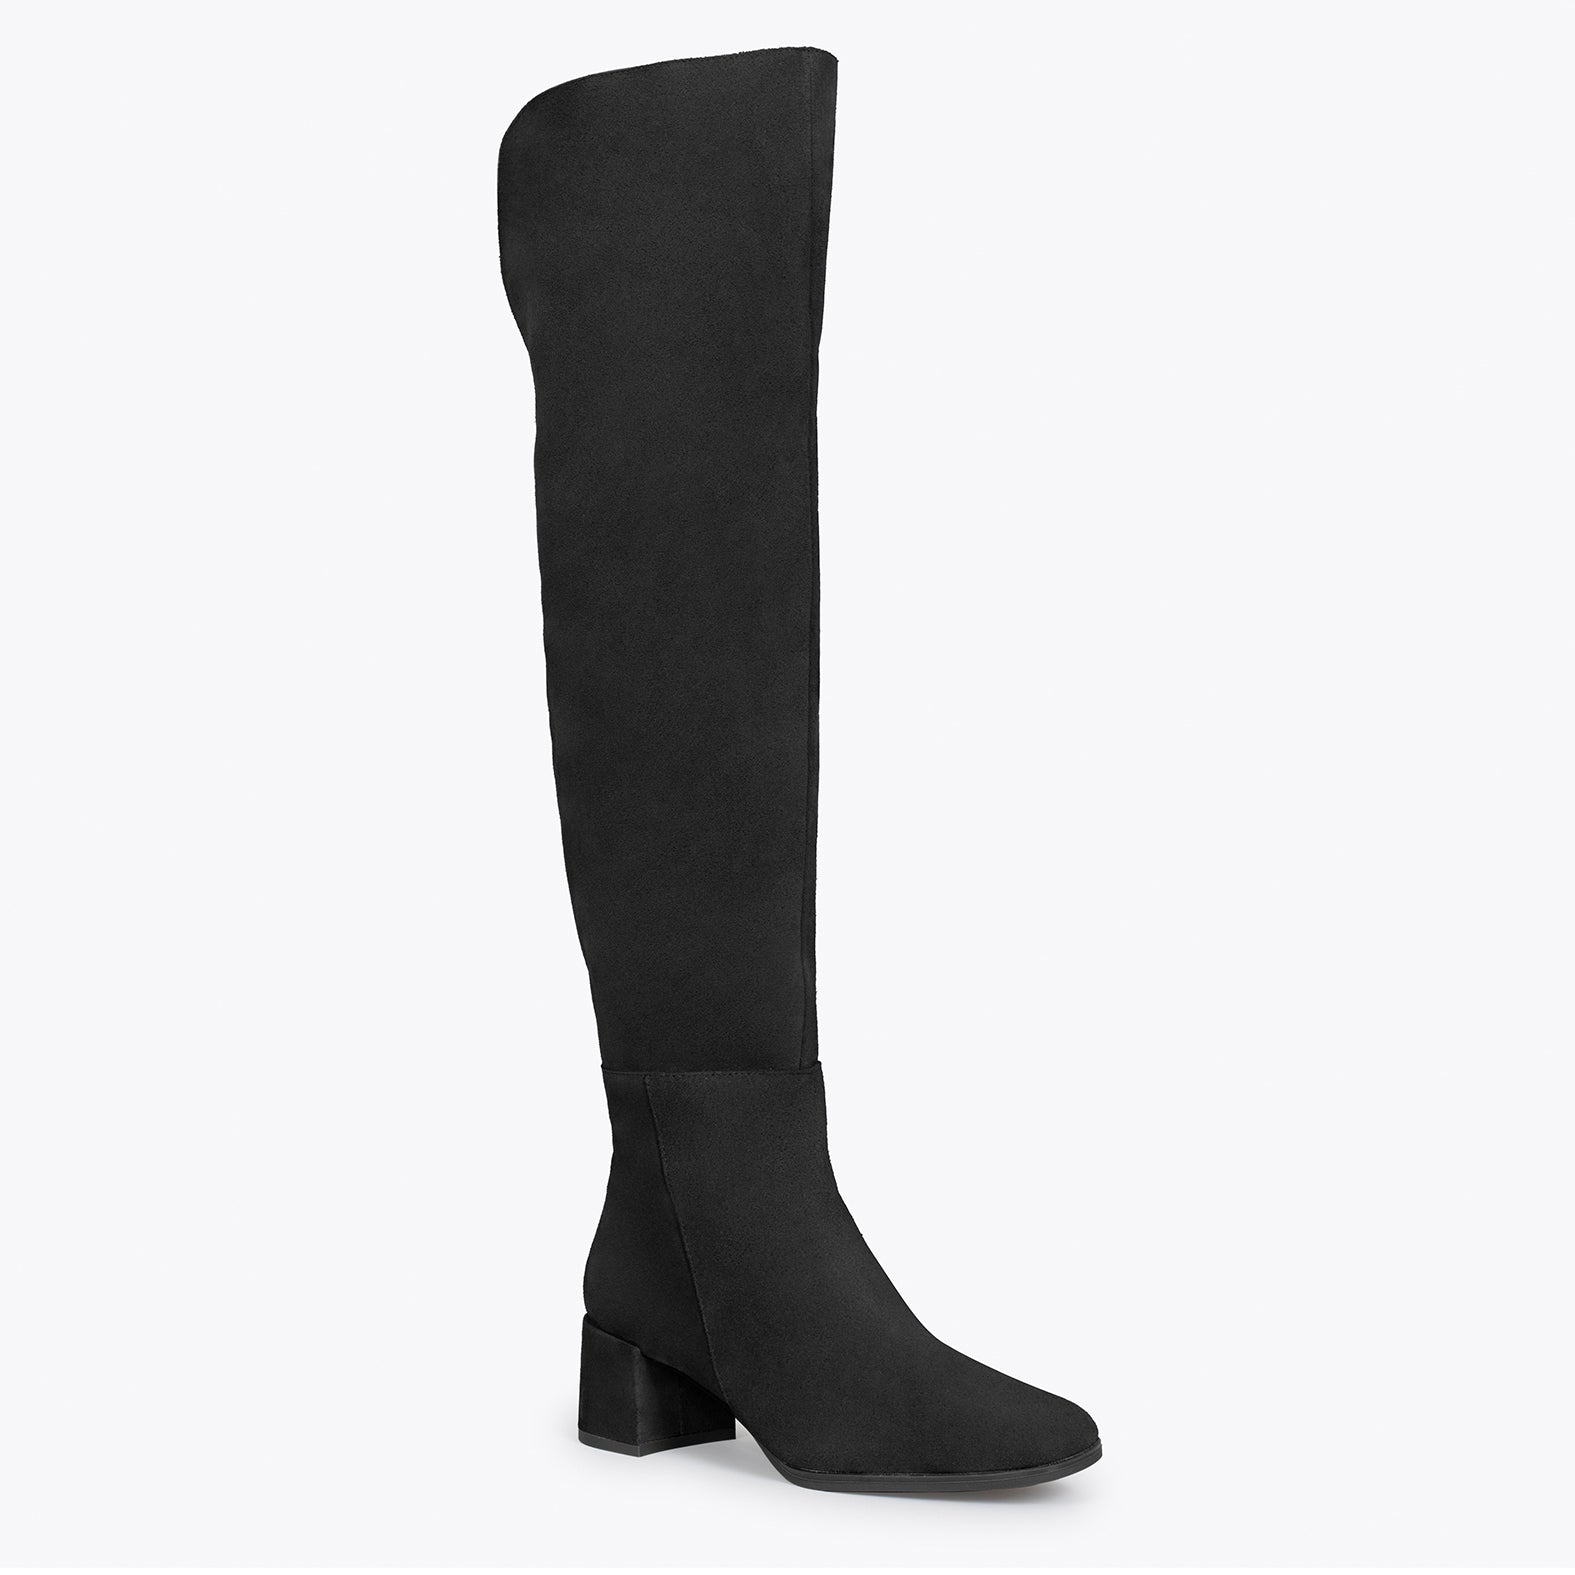 MUSKETEER – BLACK over-the-knee boot